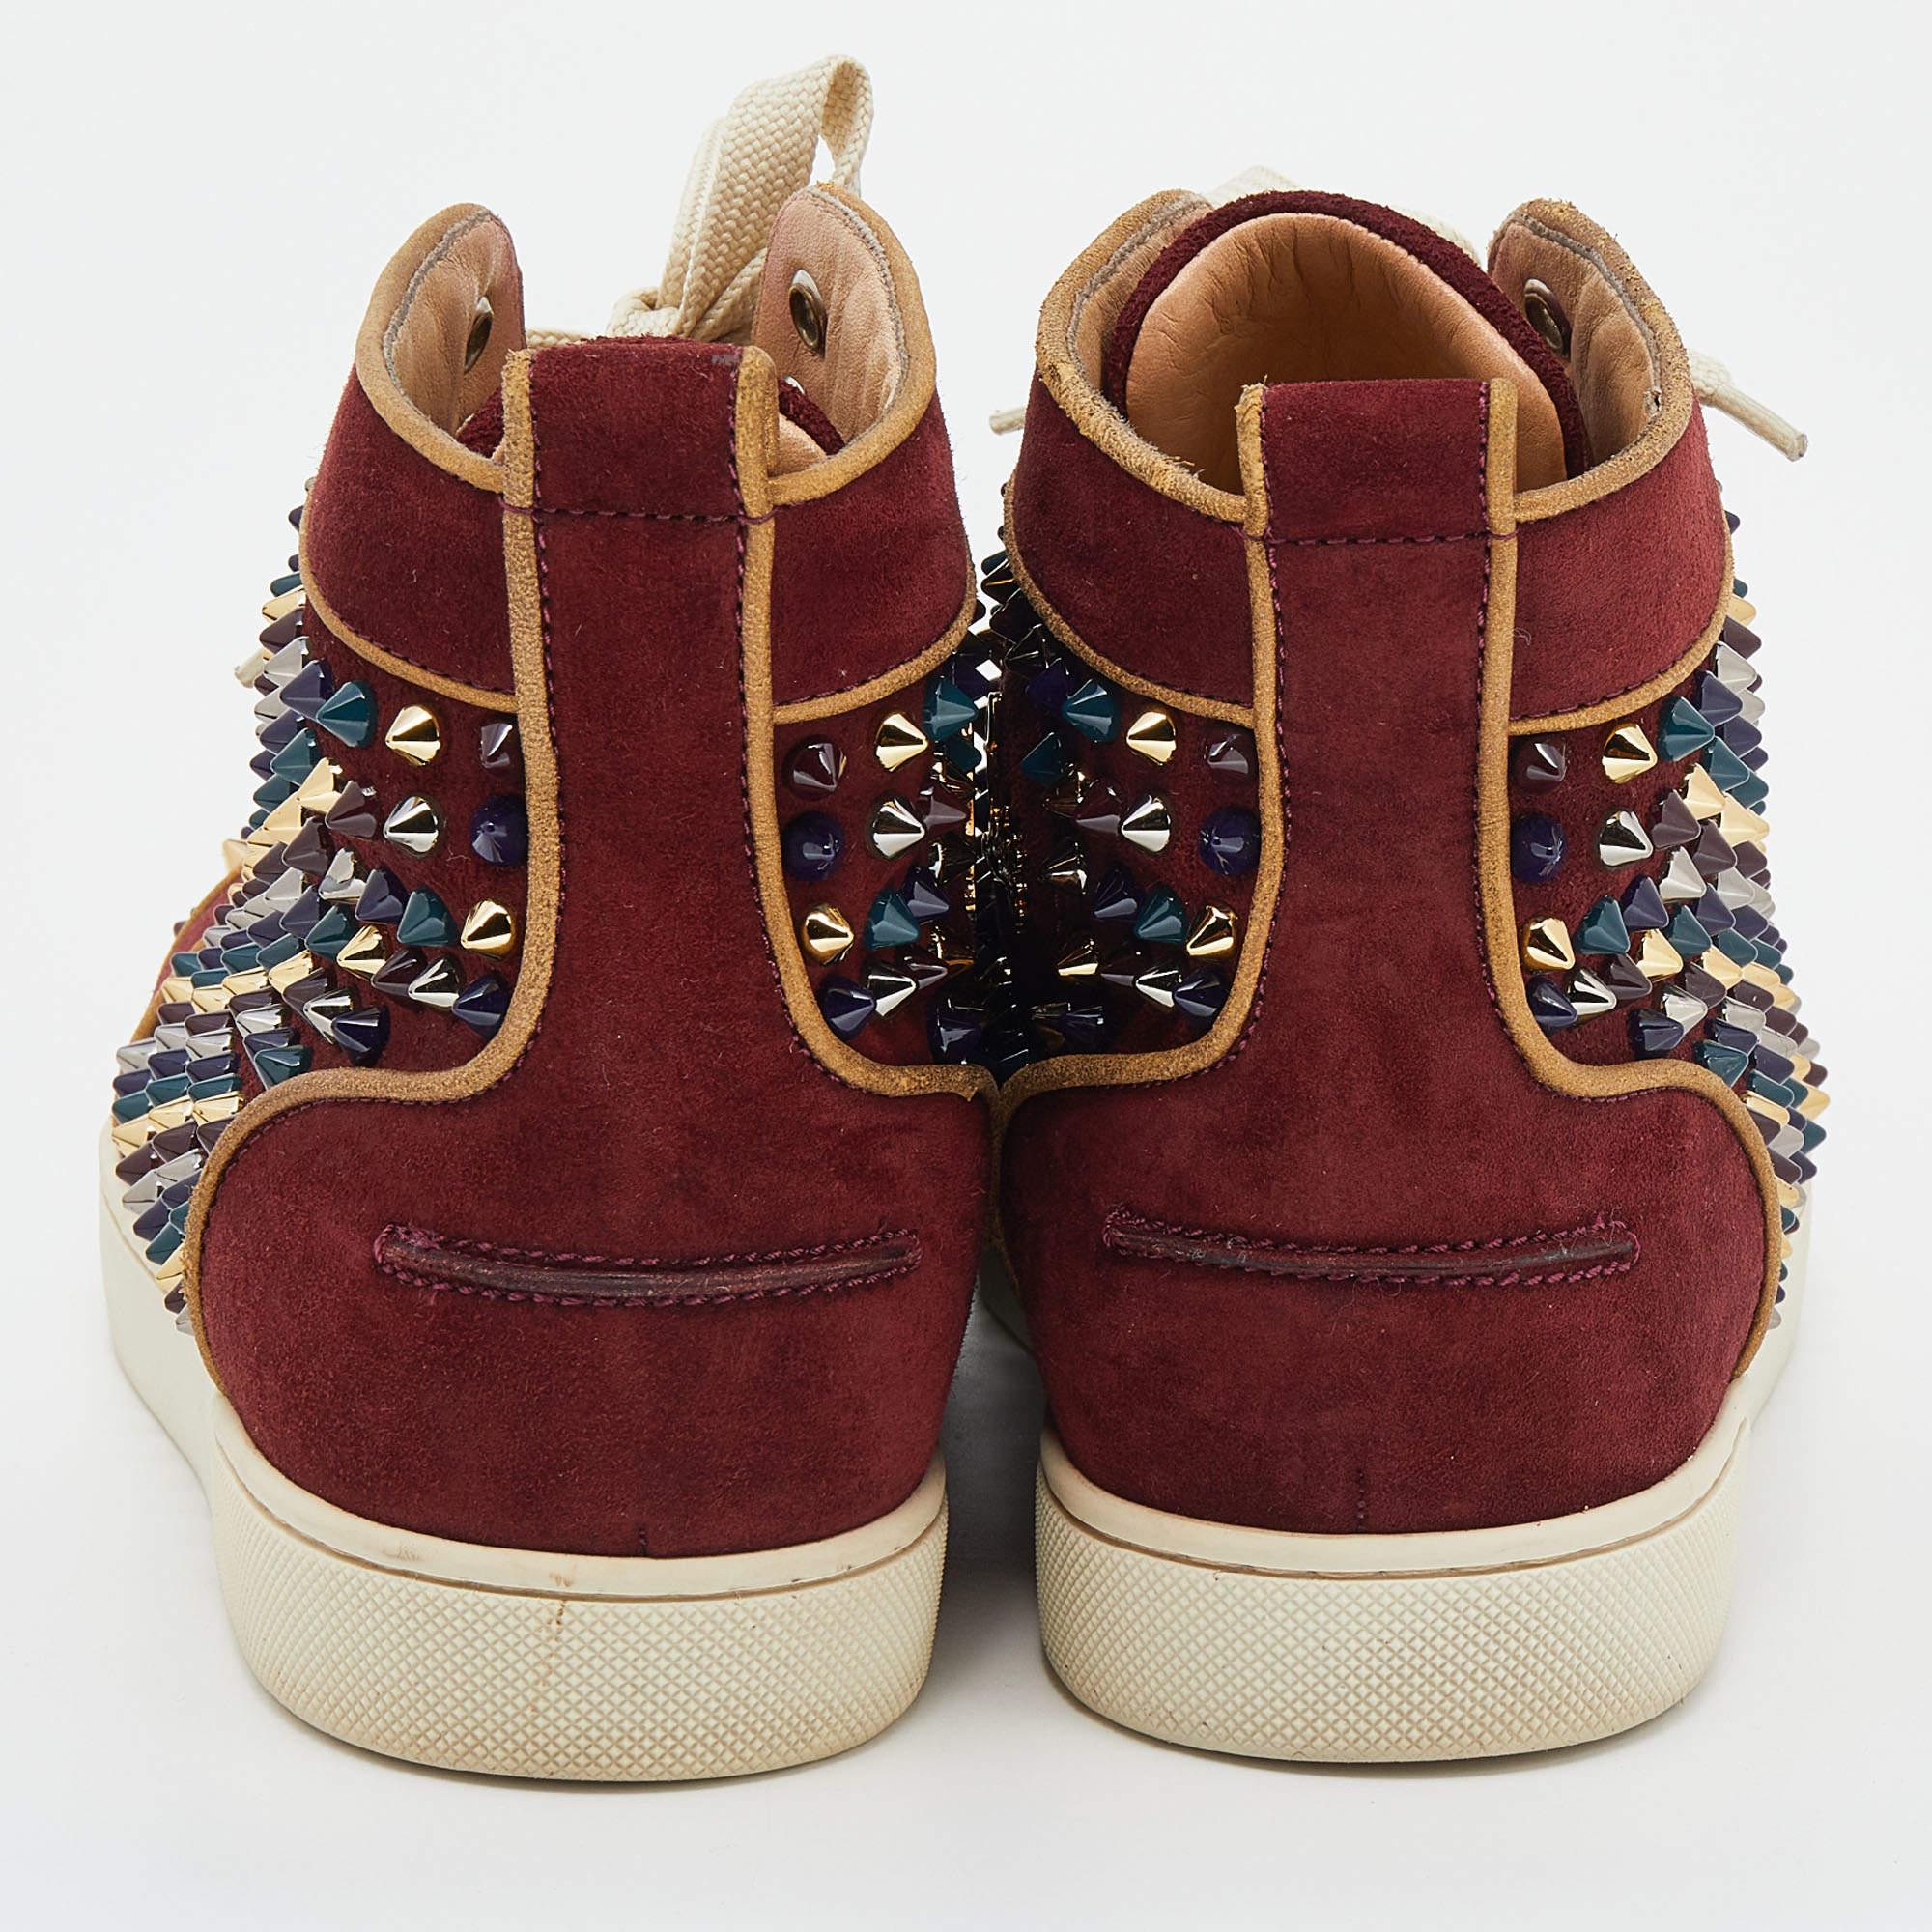 Christian Louboutin Burgundy Suede Louis Spikes High Top Sneakers Size 37.5 For Sale 1